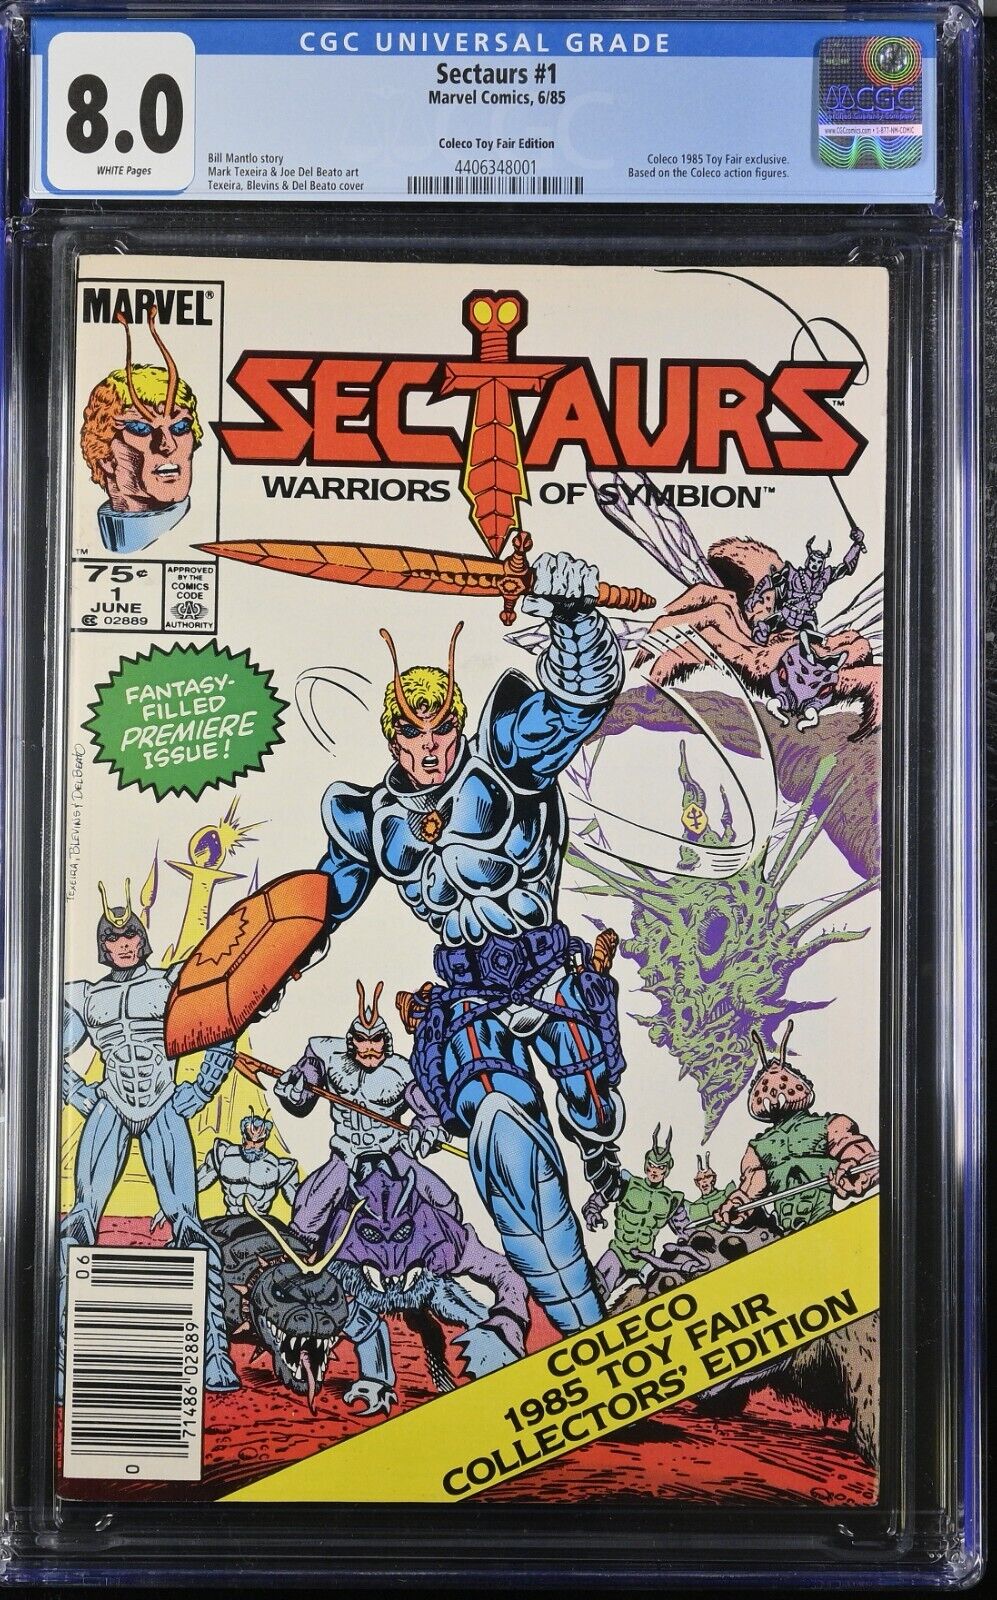 Sectaurs Warriors of Symbion #1 Marvel 1985 Coleco Toy Fair Edition RARE CGC 8.0